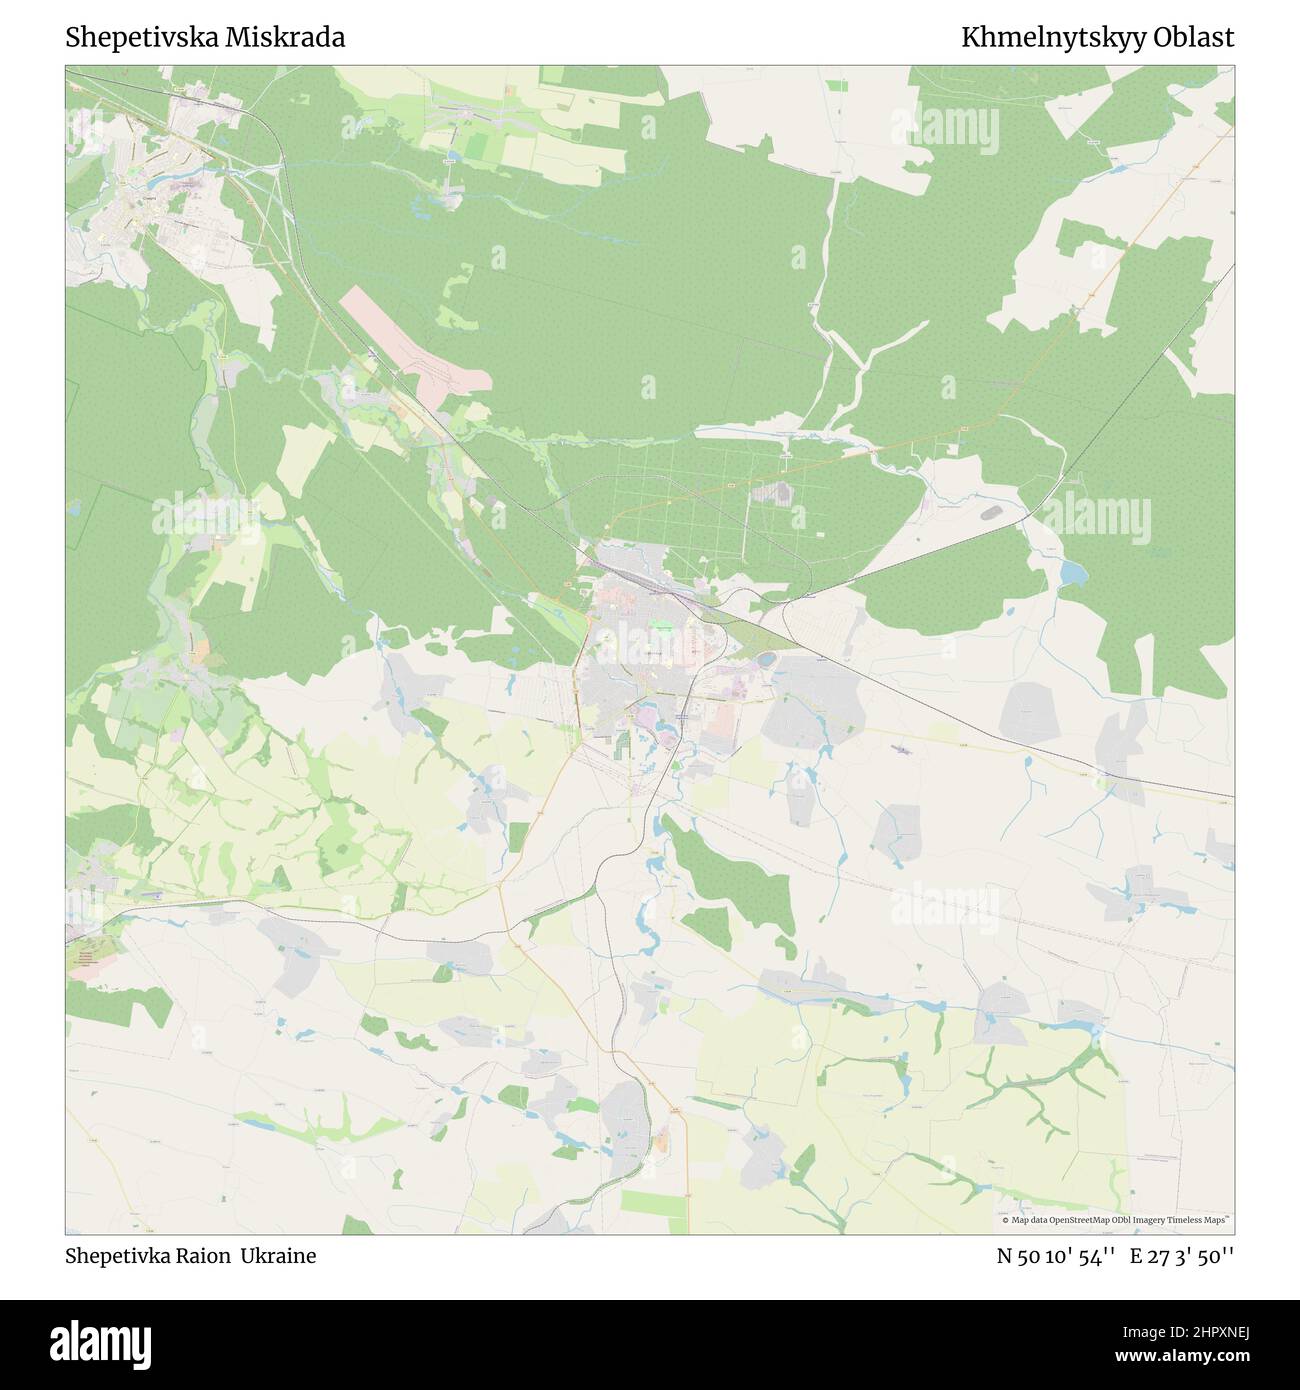 Shepetivska Miskrada, Shepetivka Raion, Ukraine, Khmelnytskyy Oblast, N 50 10' 54'', E 27 3' 50'', map, Timeless Map published in 2021. Travelers, explorers and adventurers like Florence Nightingale, David Livingstone, Ernest Shackleton, Lewis and Clark and Sherlock Holmes relied on maps to plan travels to the world's most remote corners, Timeless Maps is mapping most locations on the globe, showing the achievement of great dreams Stock Photo